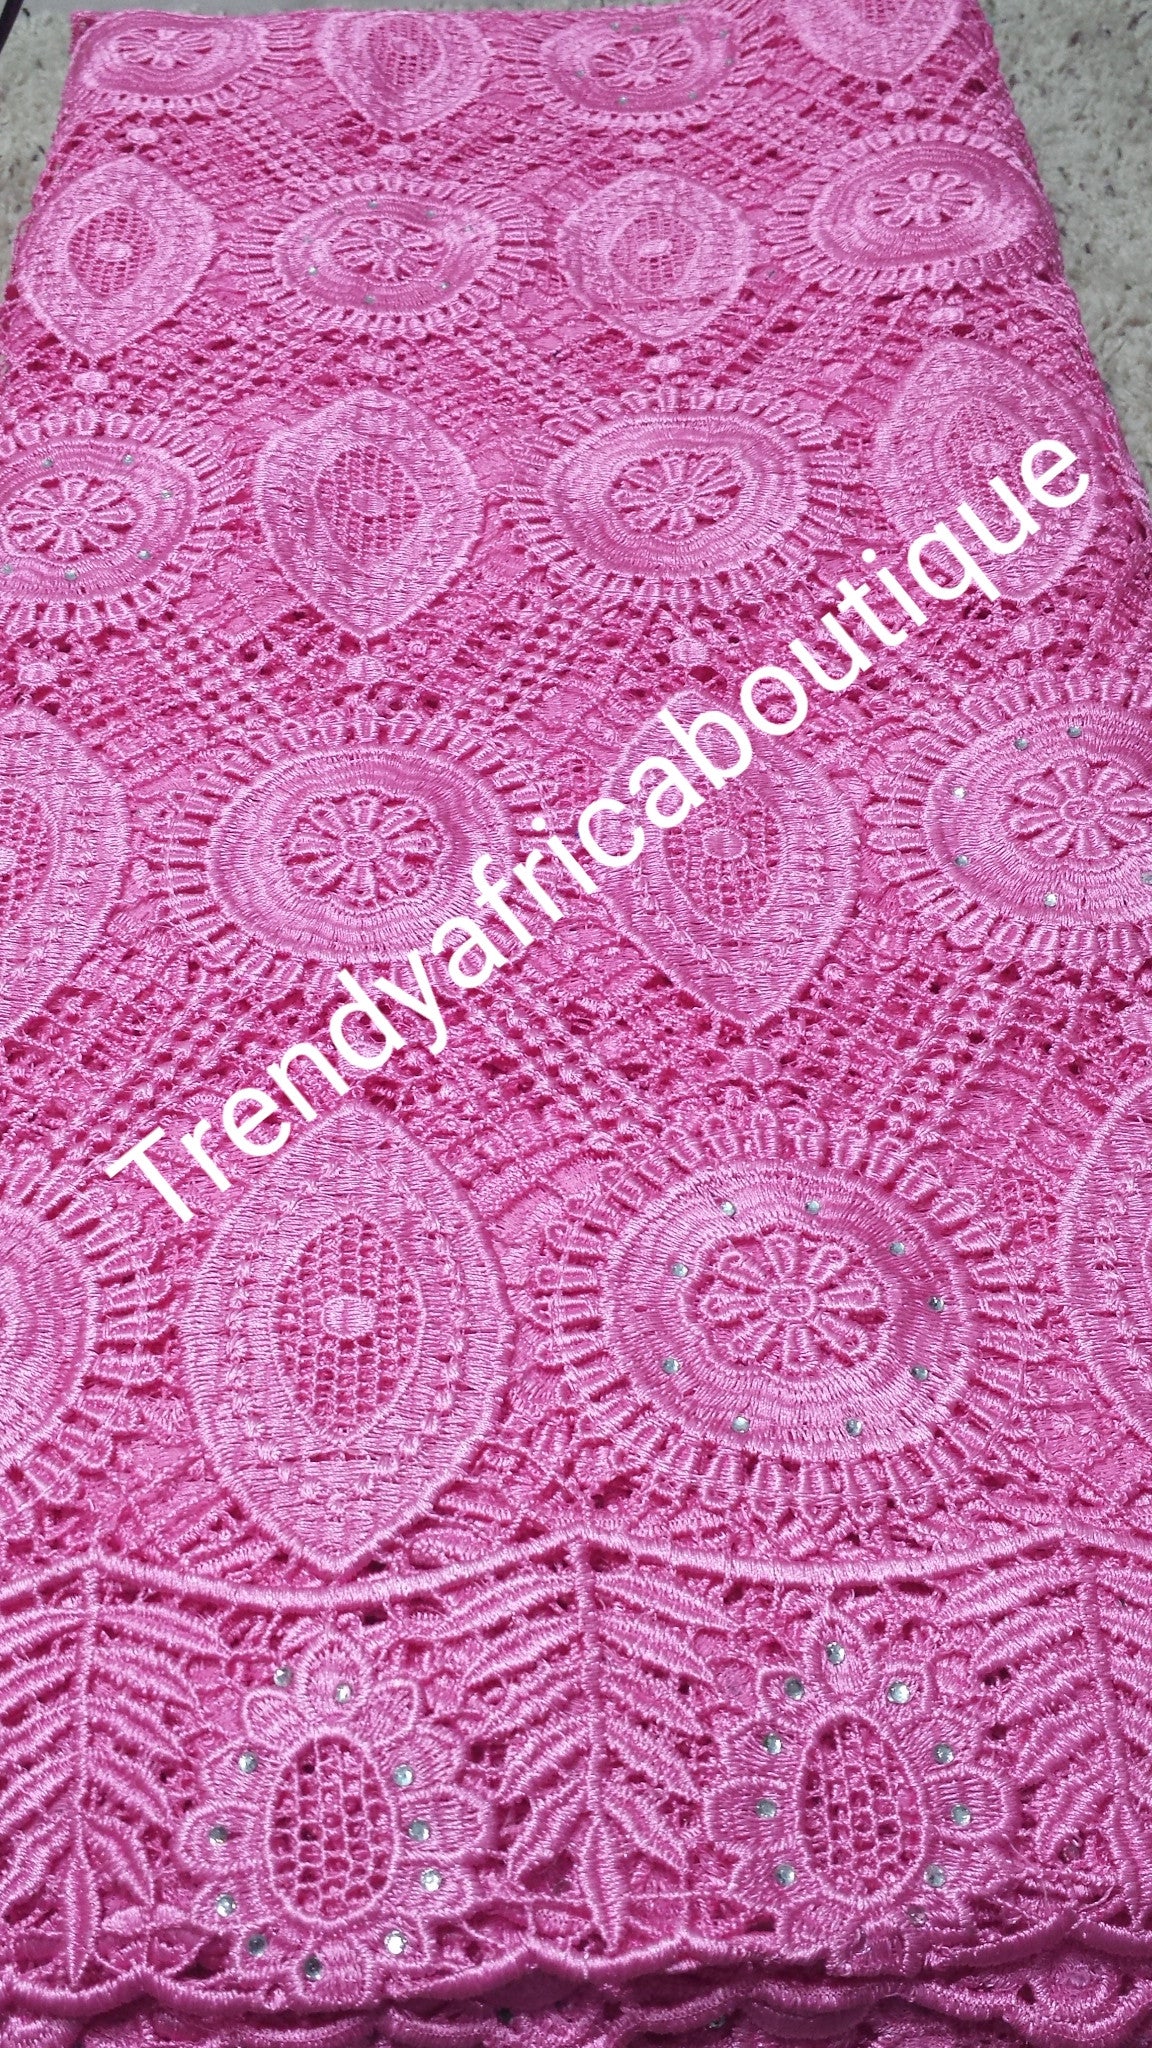 Baby pink cord-lace fabric with crystal stones for sale. Cord/guipure swiss lace fabric. Sold per 5yds length. Guipure-lace fabric. Excellent quality